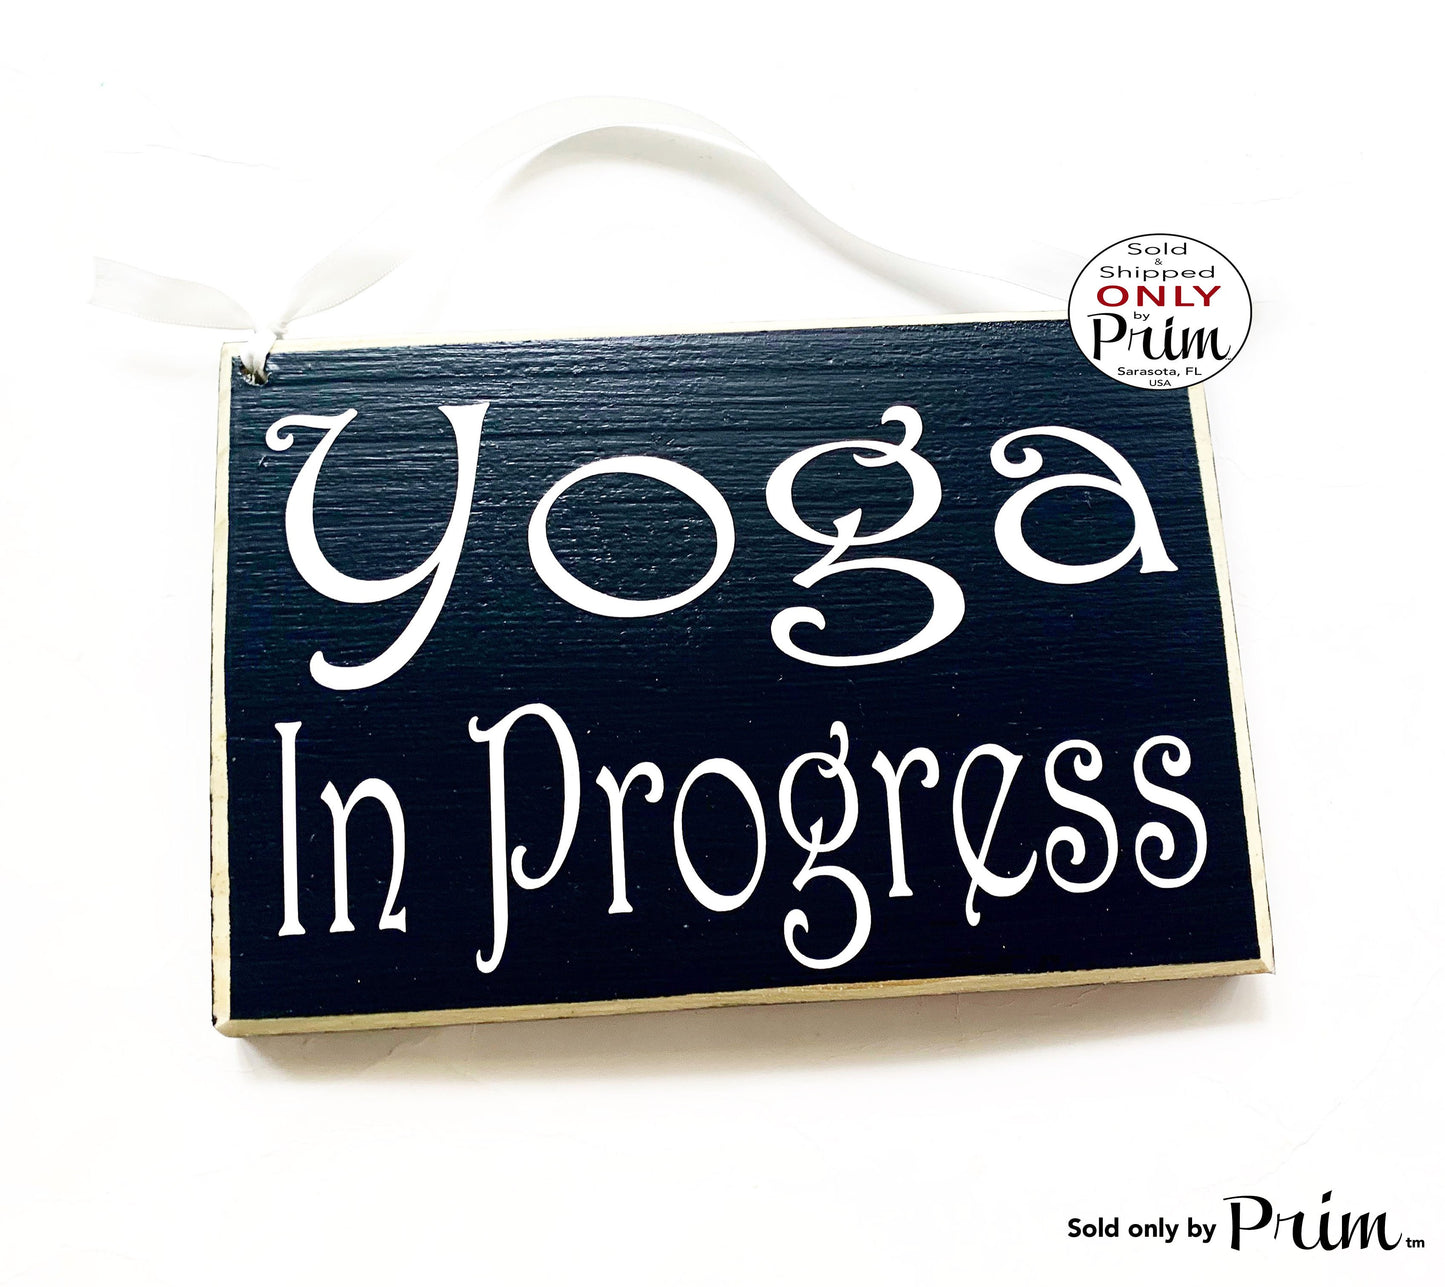 8x6 Yoga In Progress Custom Wood Sign In Session Namaste Relax Meditation Om Shhh Soft Voices Quiet Silent Home Office Door Hanger Plaque